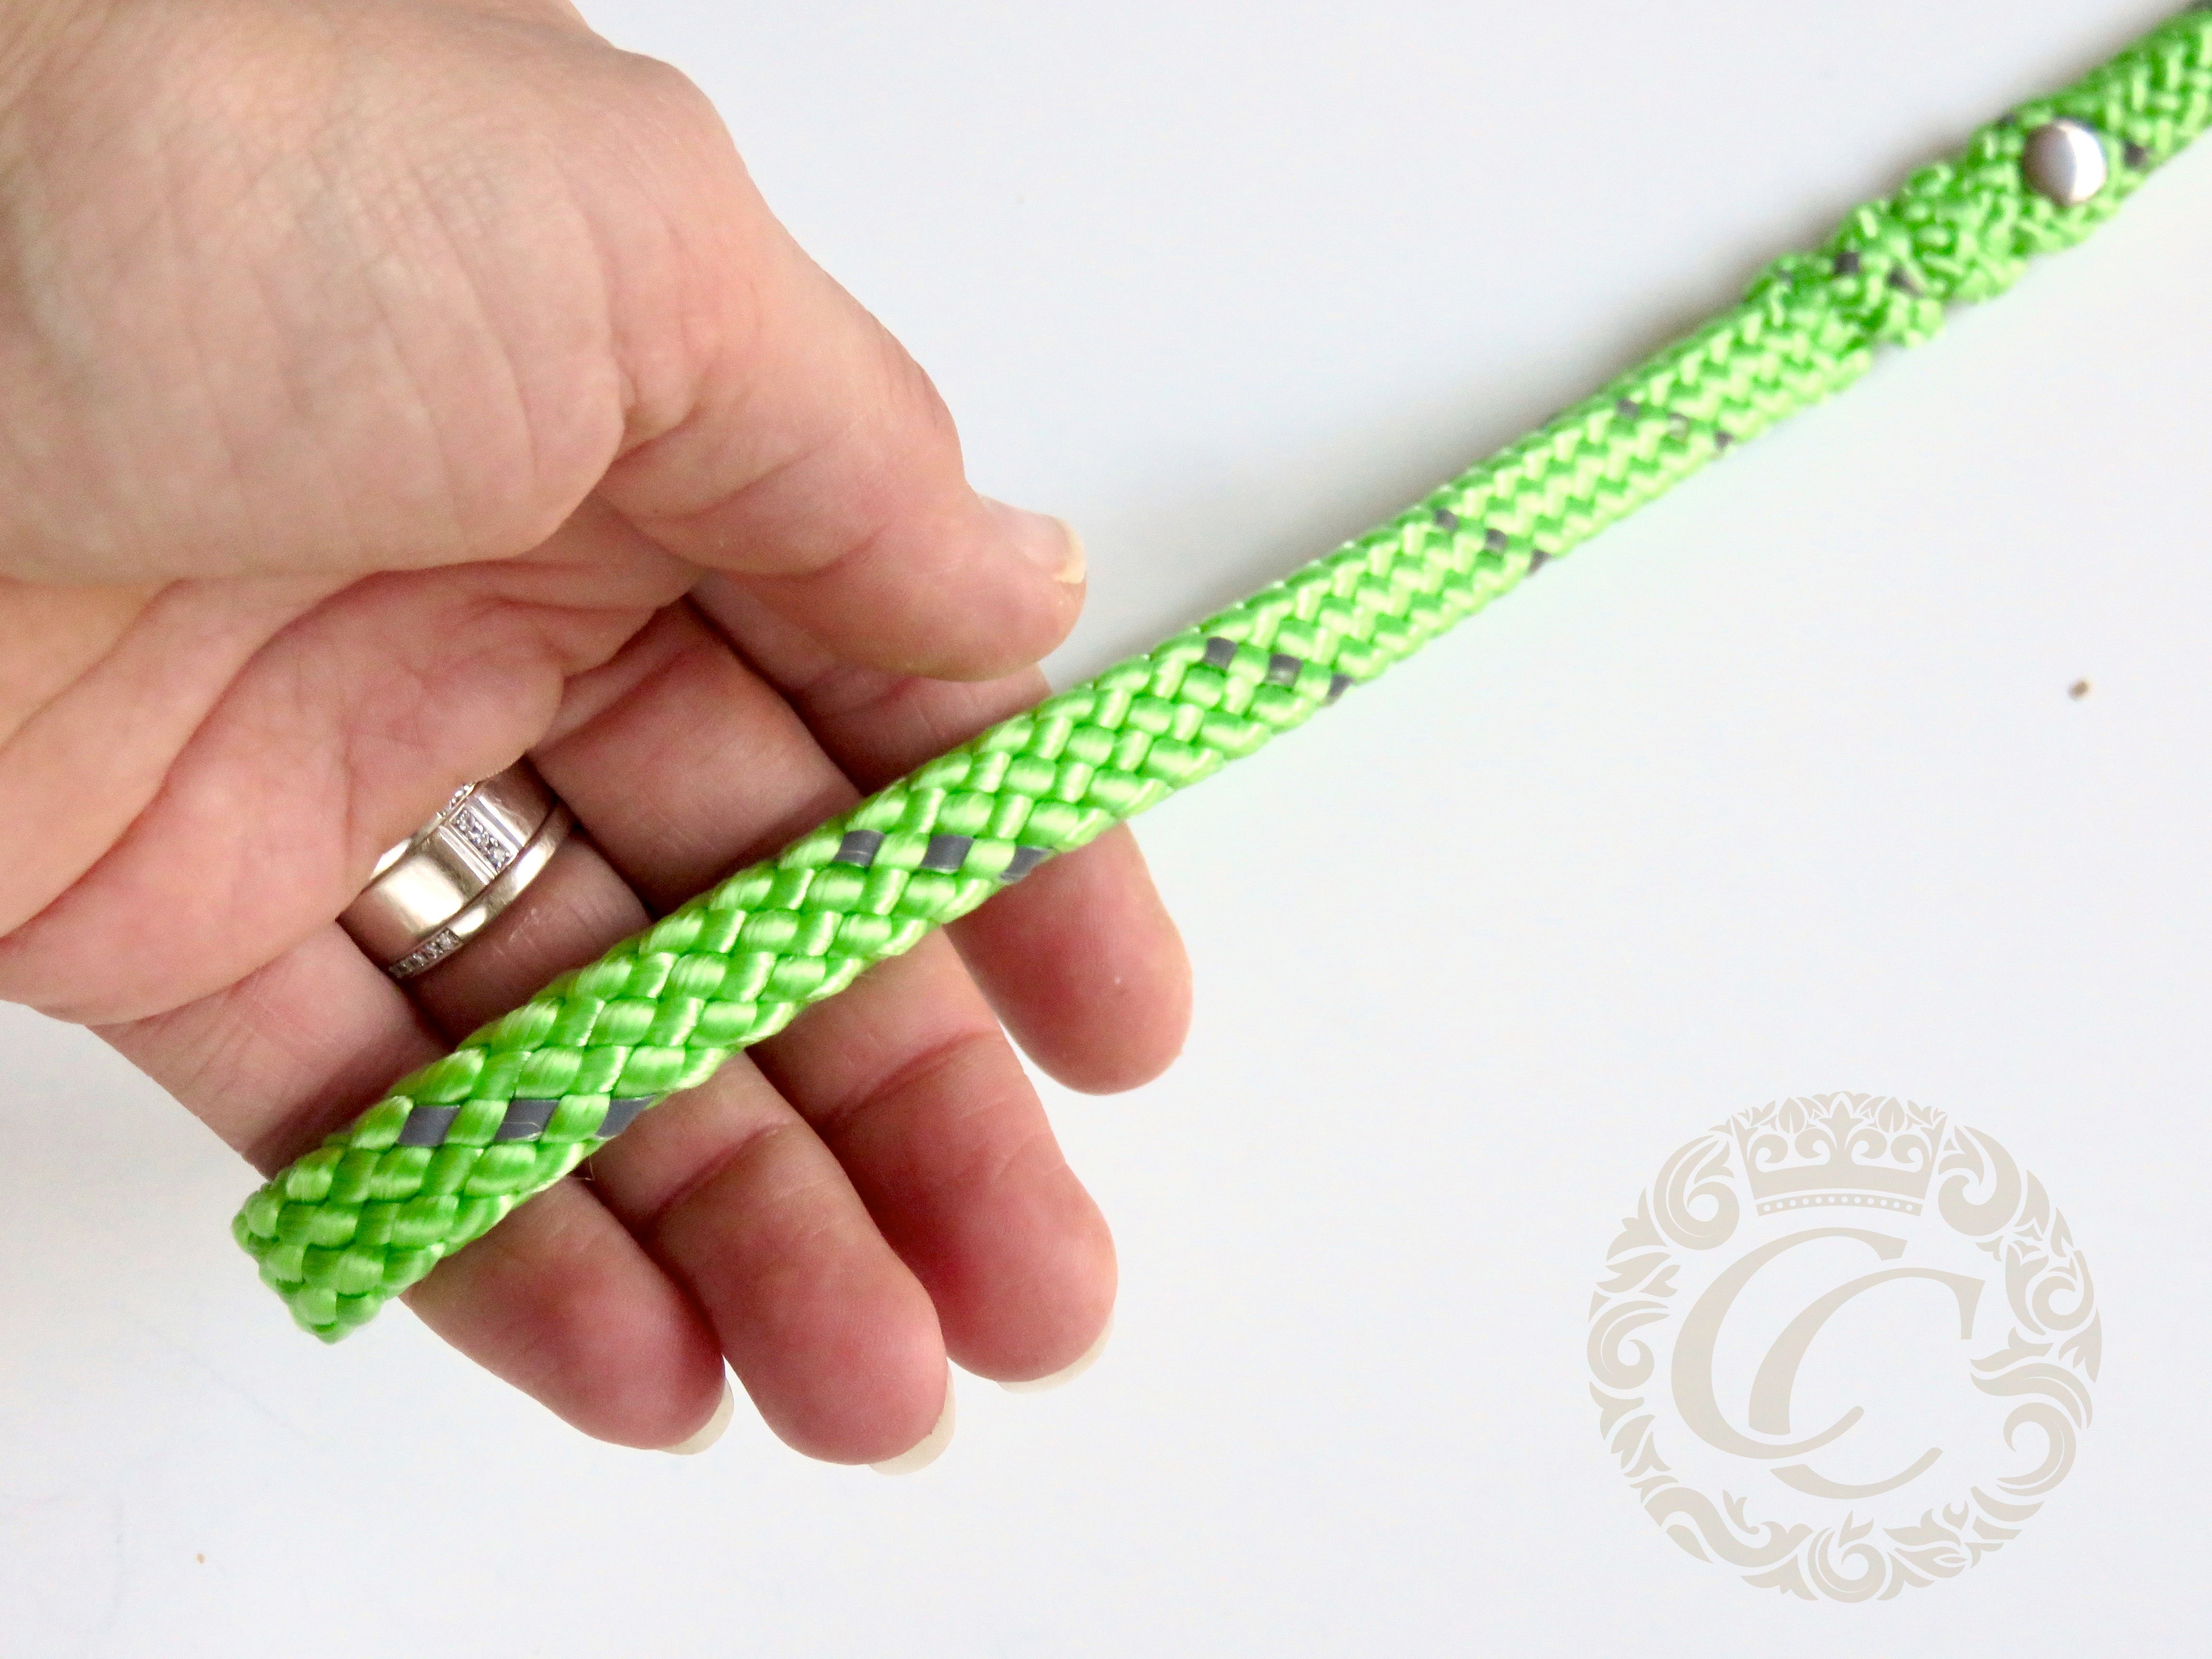 Dog leash for small & medium dogs Reflective Green | CollarCrafts dog leashes and collars | Dog leash paracord | Dog leash washable | Green dog lead | Mini dog leashes | Green reflective paracord leash | dog lead | Custom made leashes | Small dog leash | Apple green collar leash set